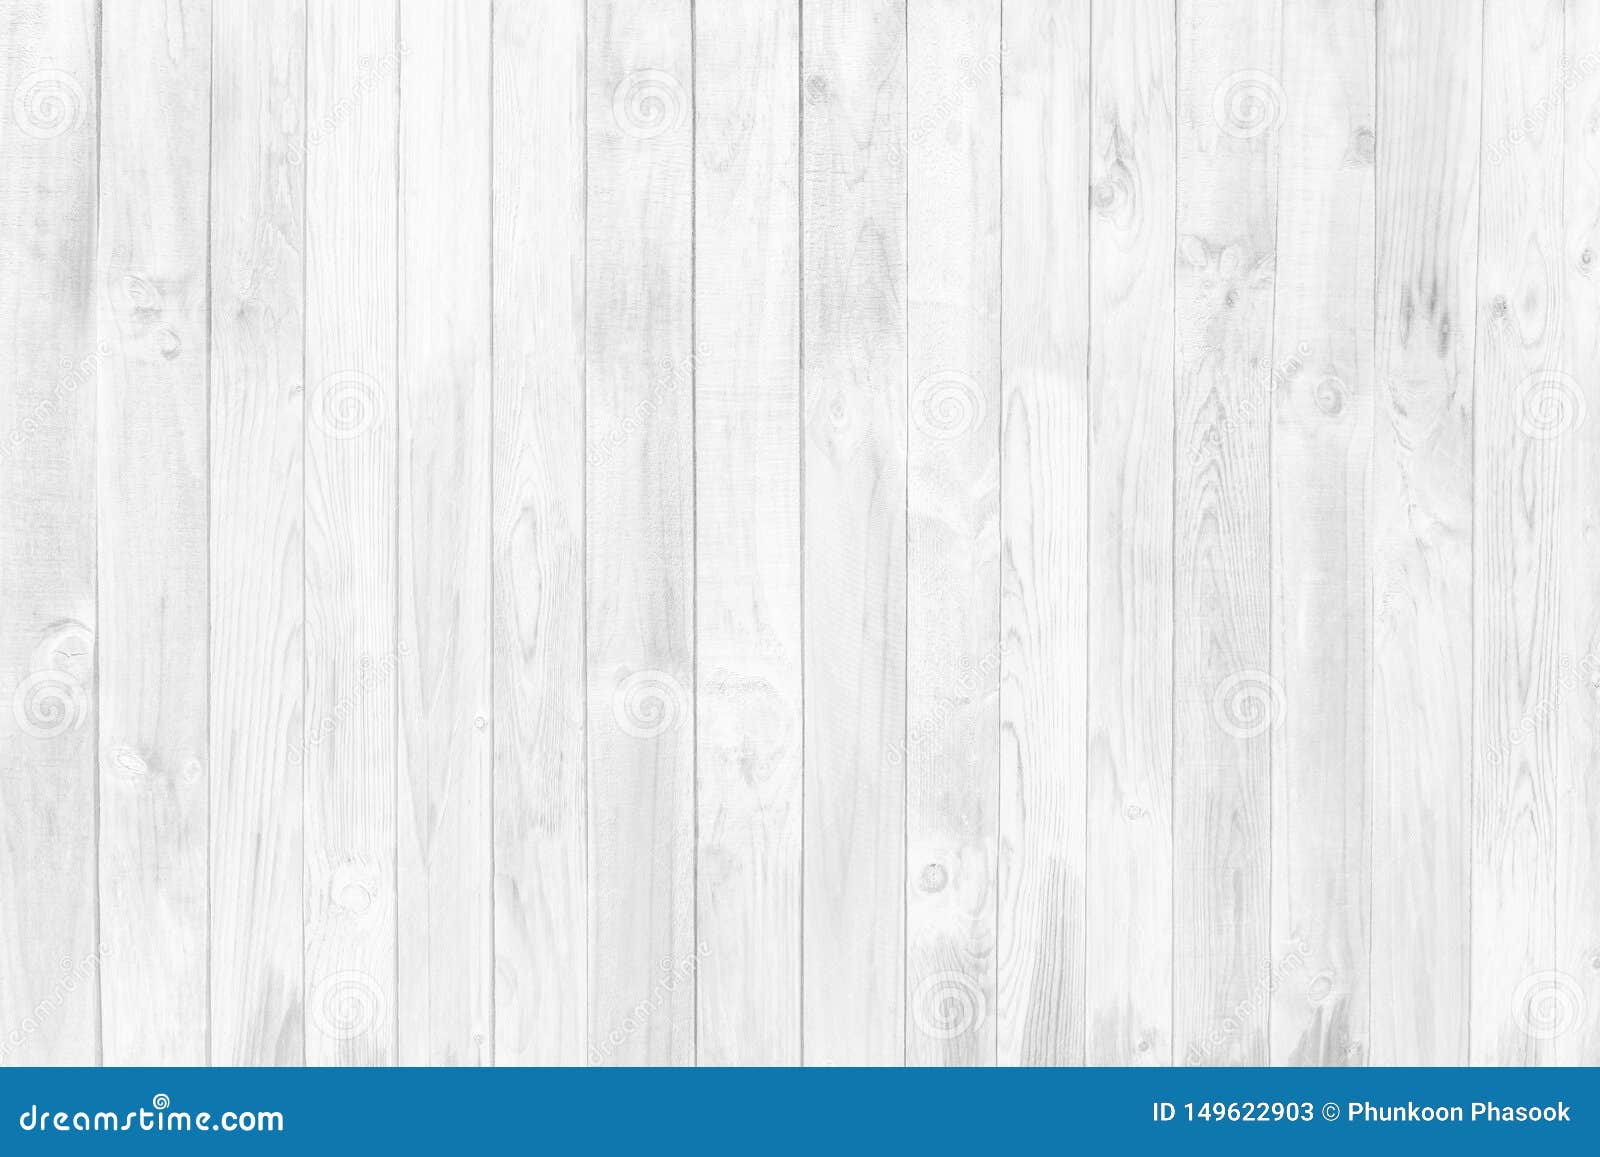 white wood wall texture and background